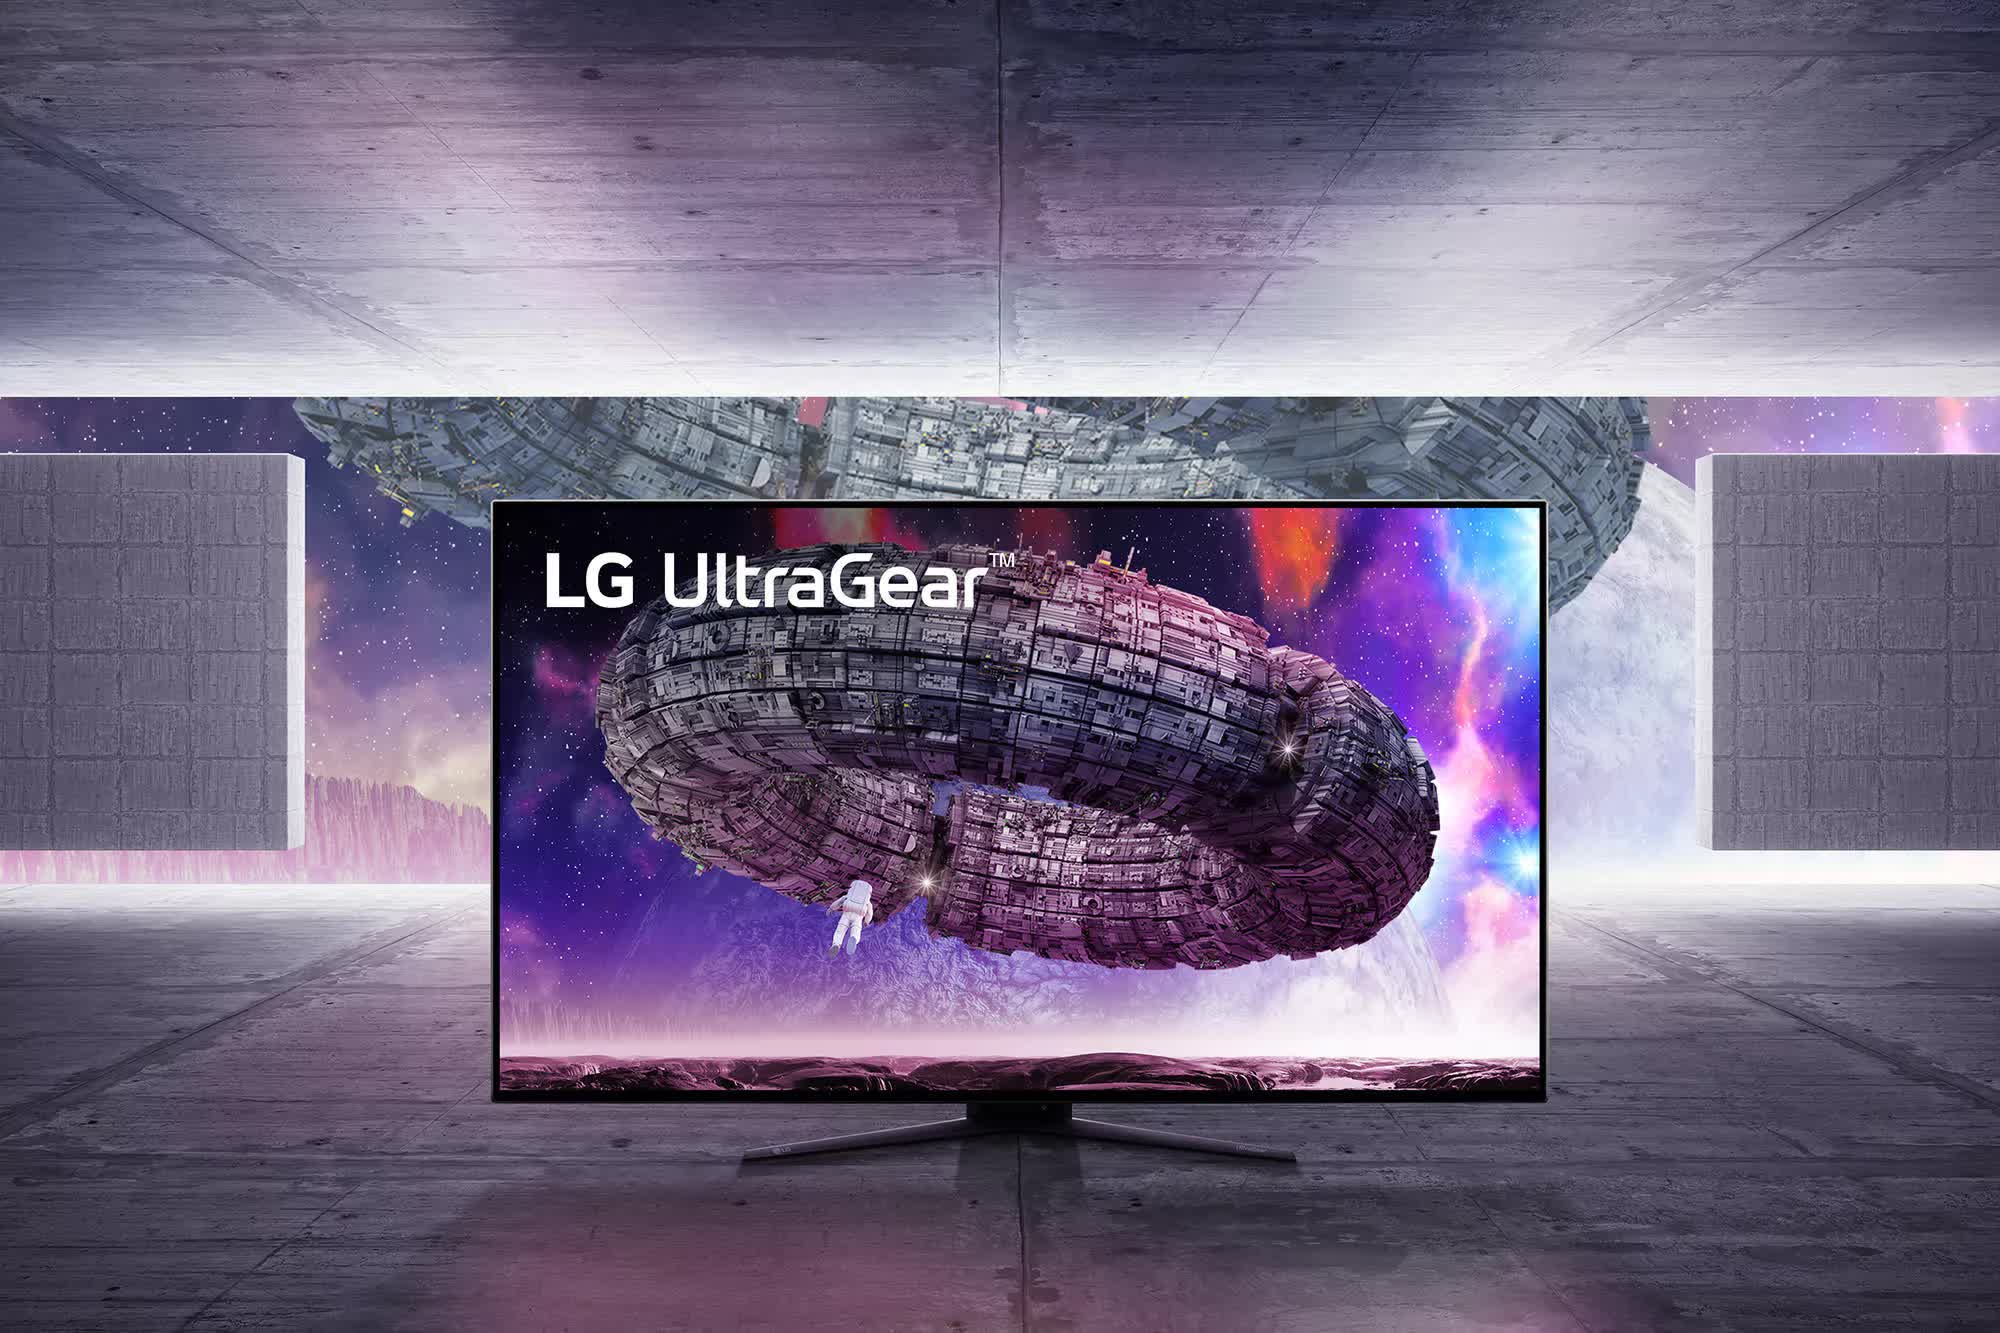 LG unveils three gaming monitors, including a 48-inch 4K OLED with a 138 Hz overclocked refresh rate